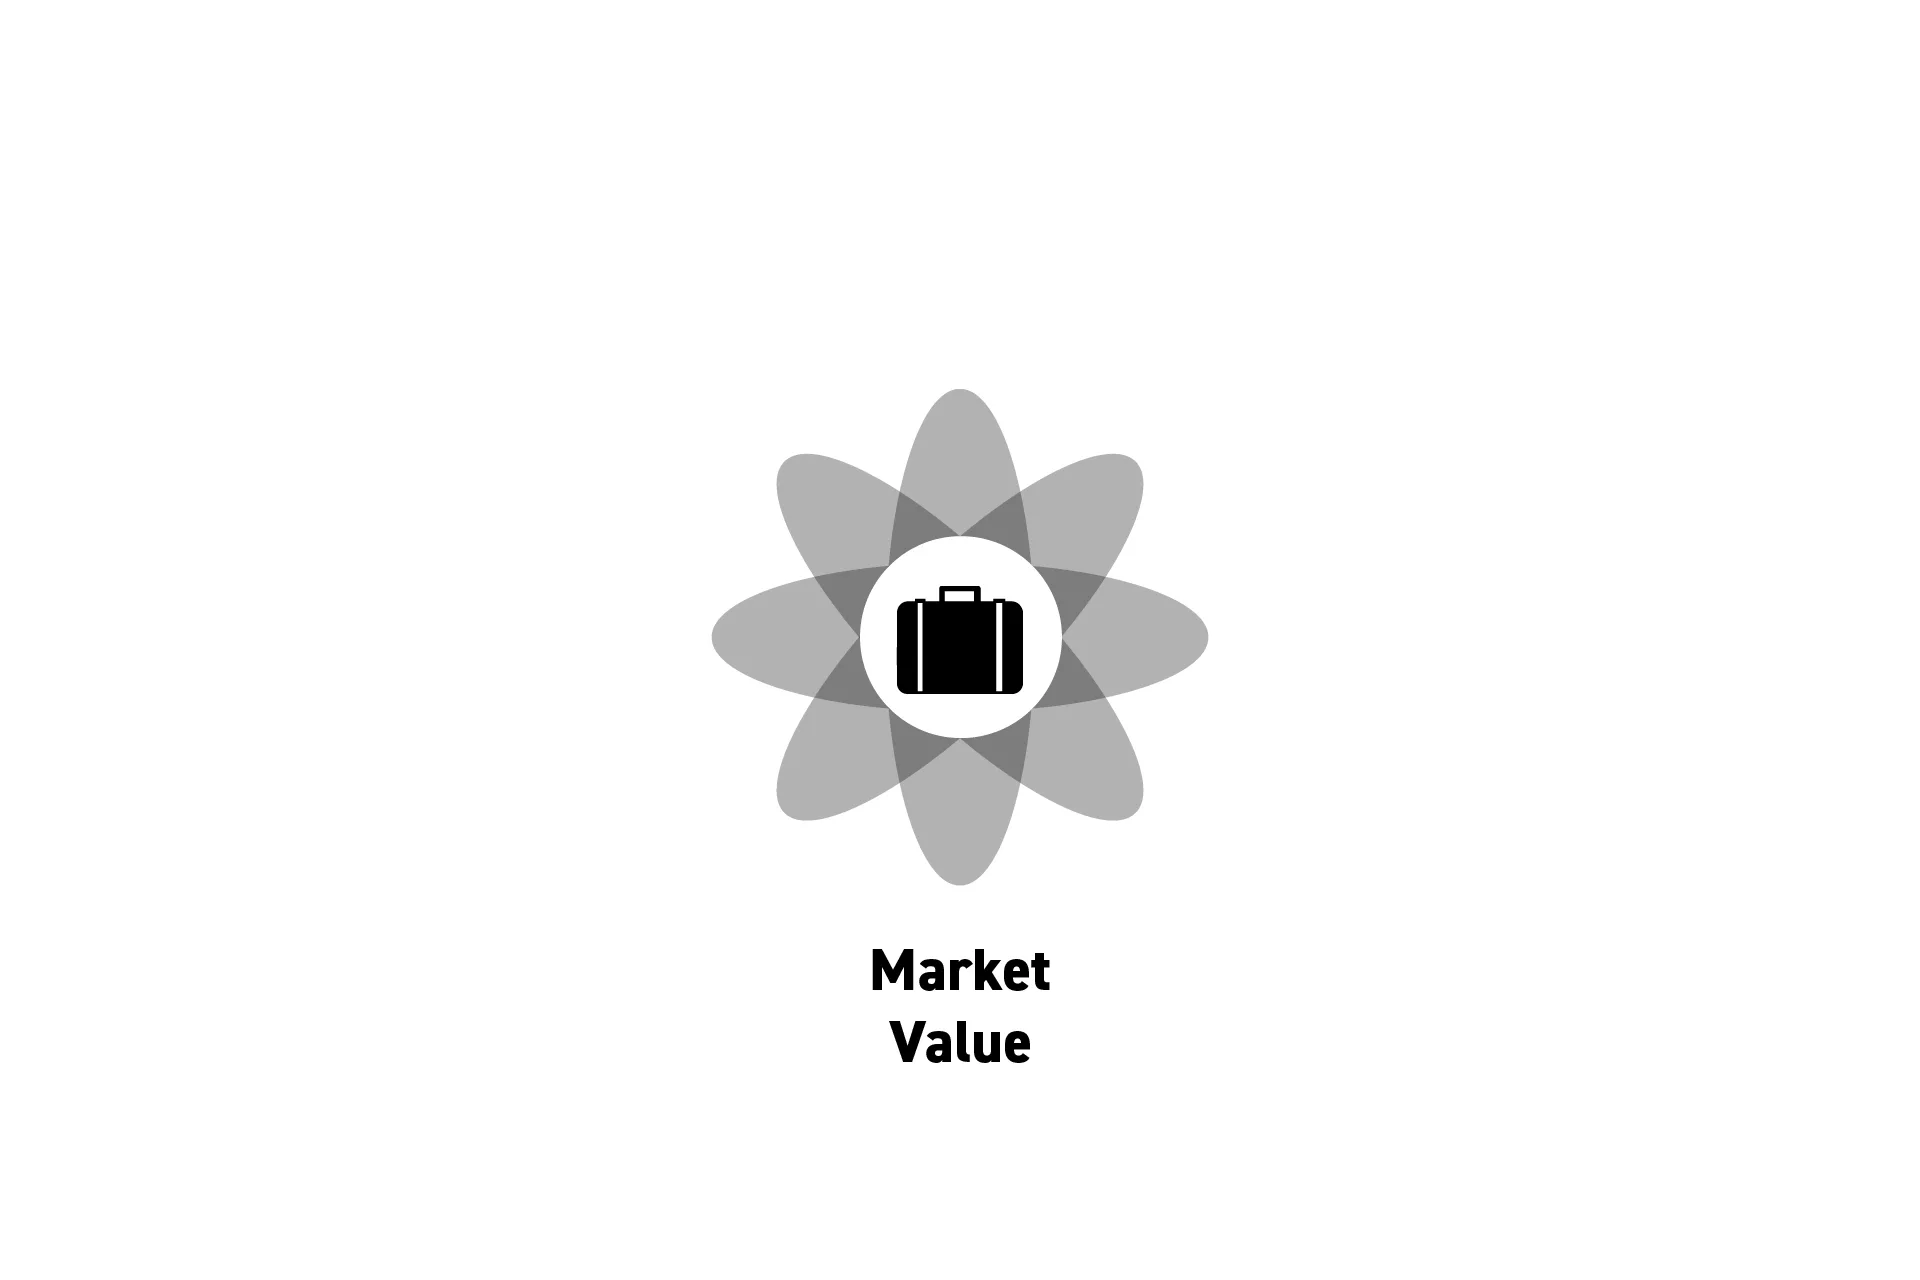 <p>A flower that represents business with the text "Market Value" beneath it.</p>